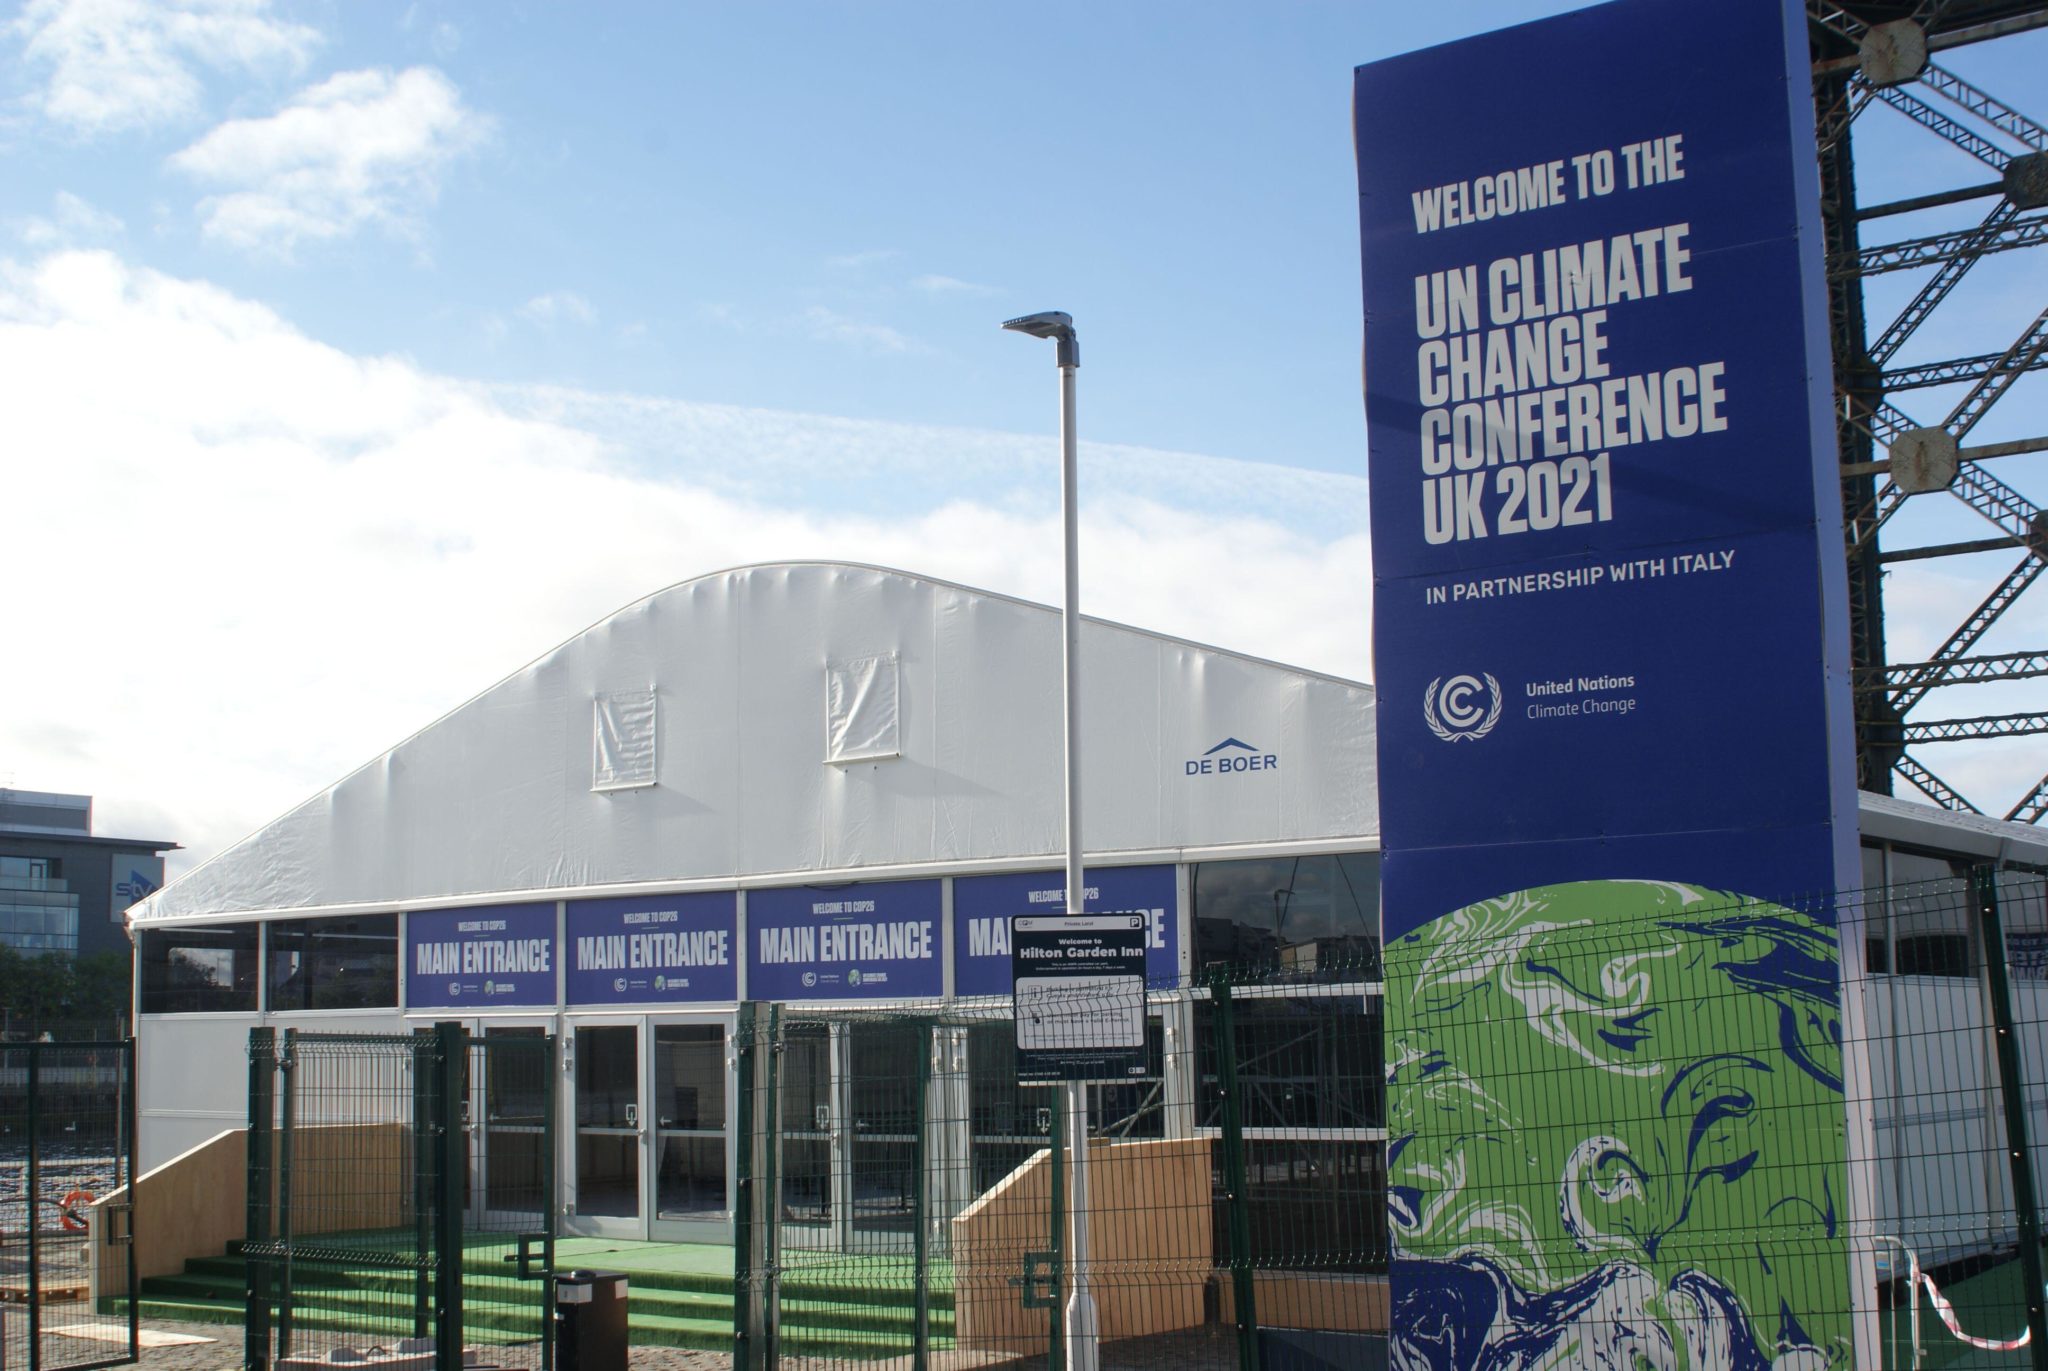 The main entrance to COP26 in Glasgow, Scotland